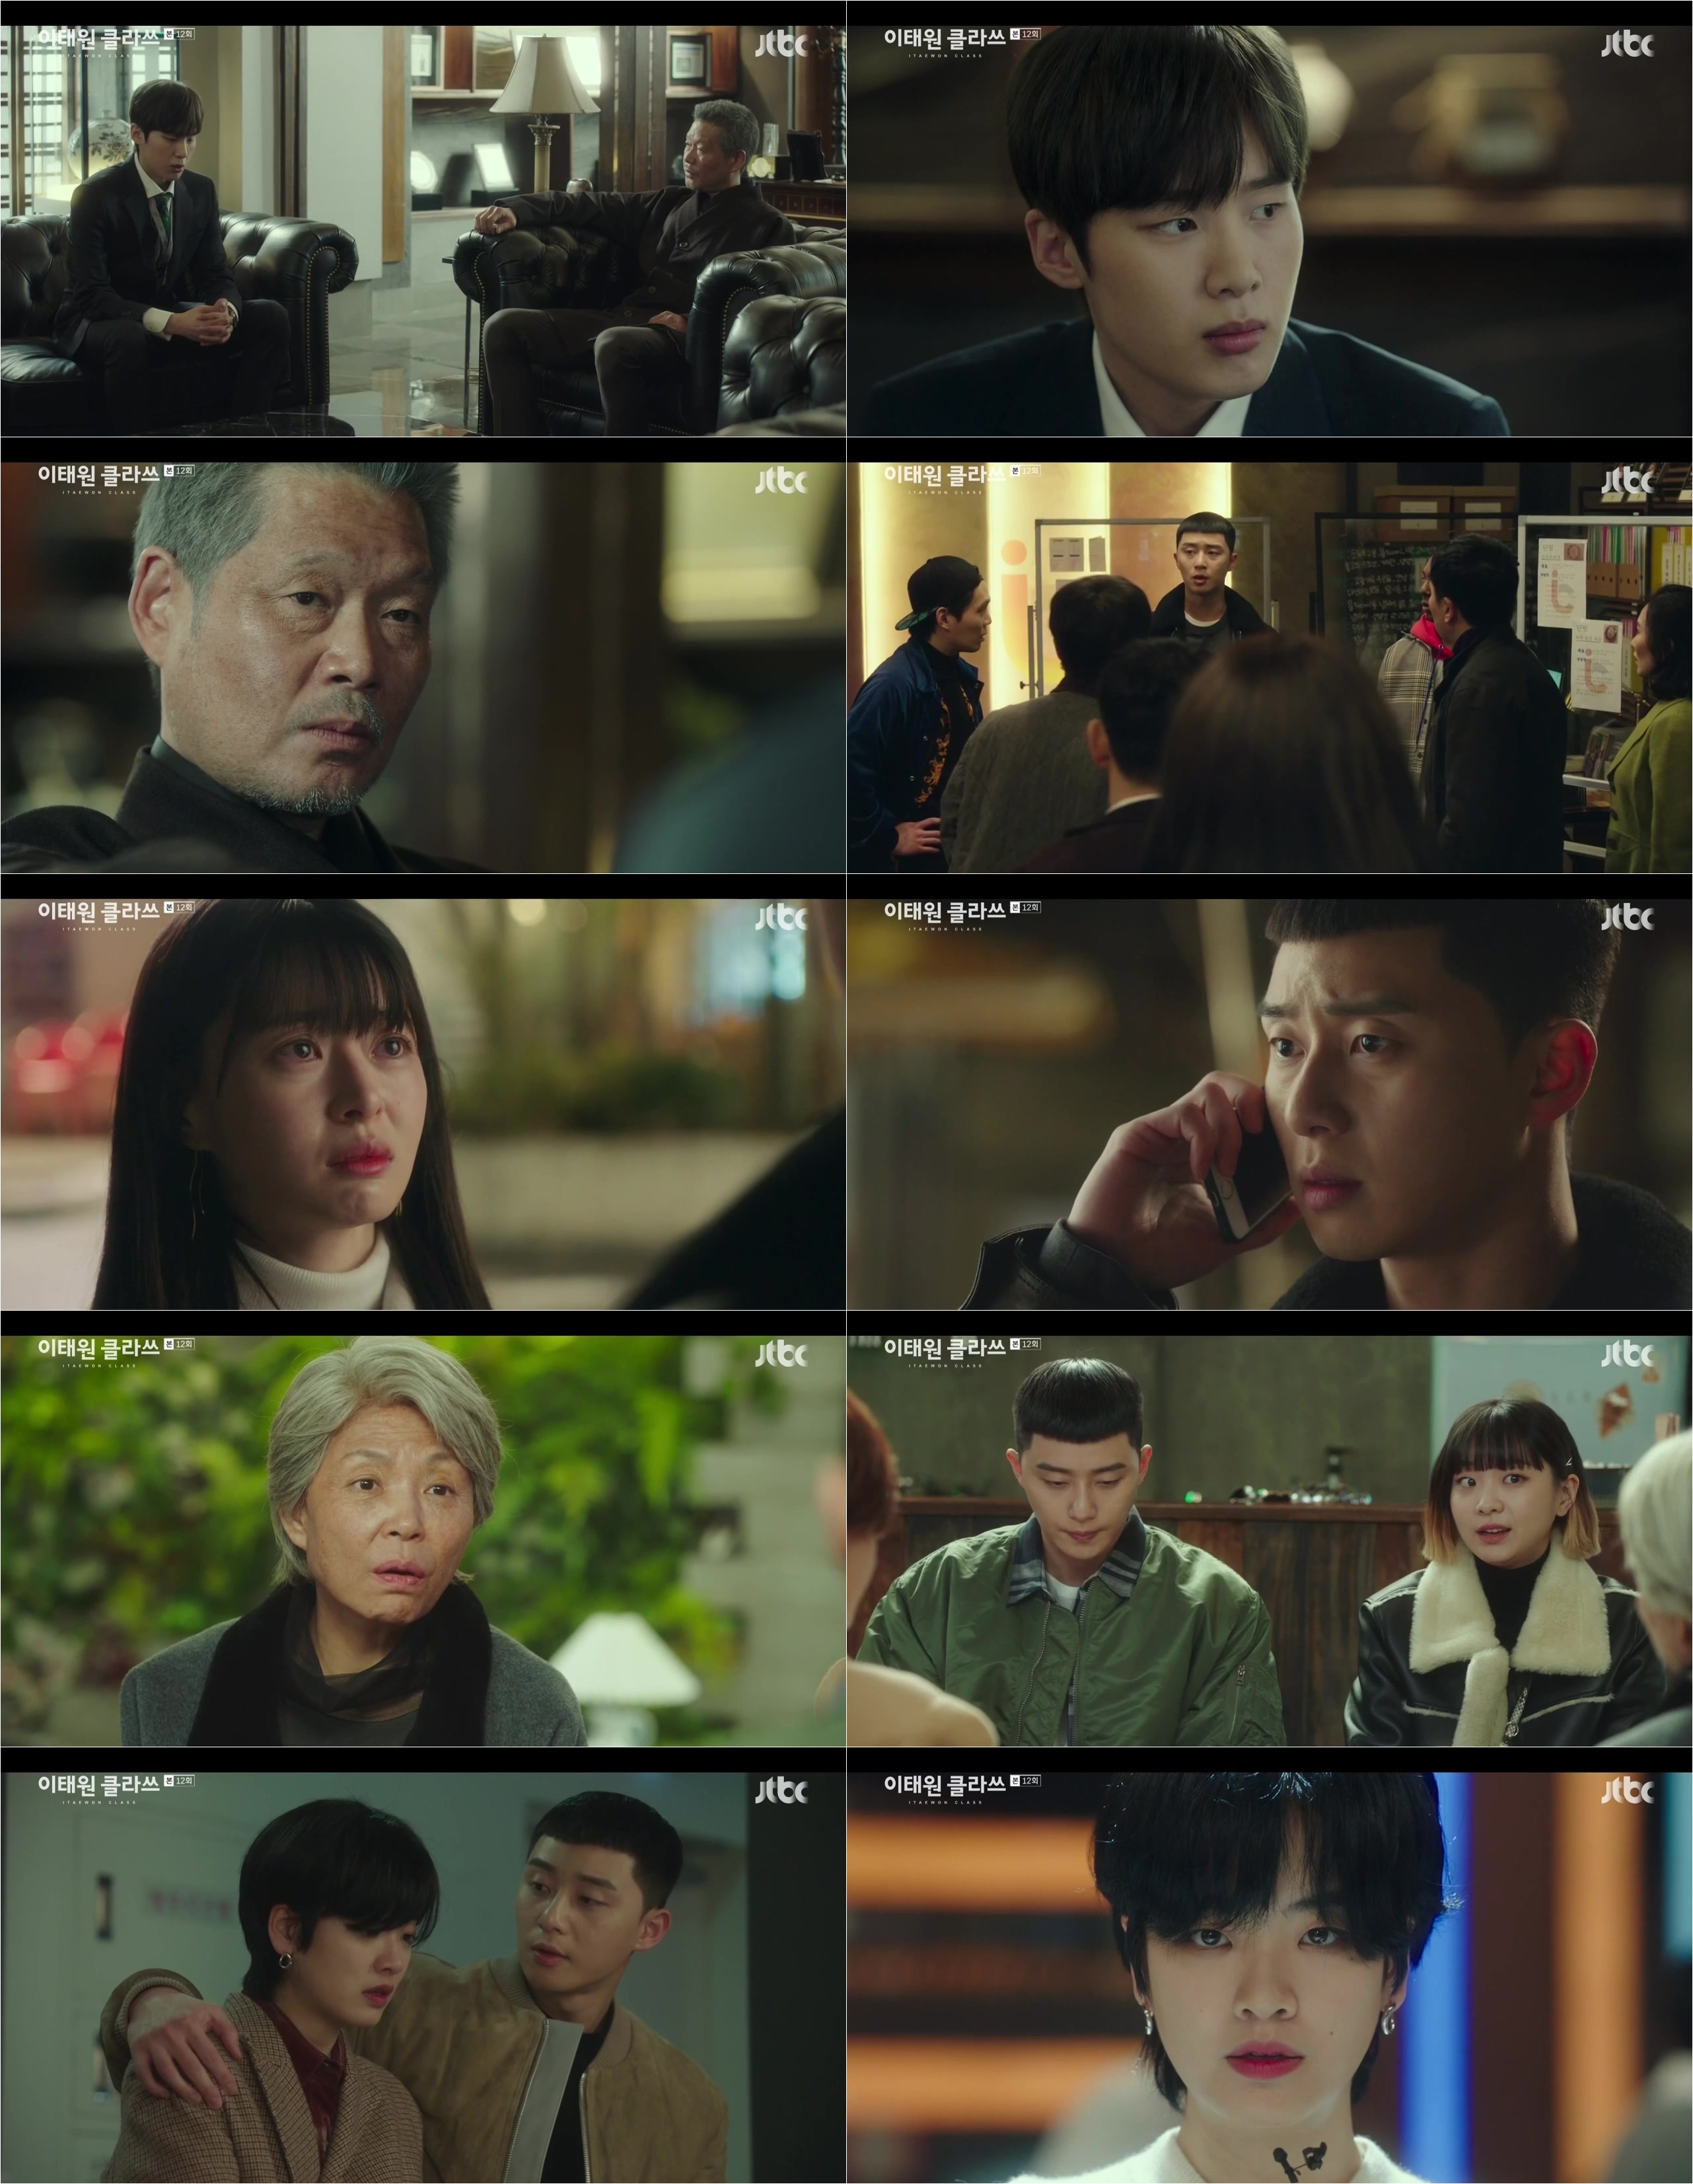 Hard youths like Itaewon Klath stones have entered the extreme end.In the 12th JTBC gilt drama Itaewon Klath (directed by Kim Sung-yoon, playwright Cho Kwang-jin, production showbox and writing, original webtoon Itaewon Klath), which was broadcast on the 7th, a straight line was drawn for revenge of Park Seo-joon, who was equipped with constant conviction and Liu Peiqi.His eyes, I cant have my happiness before revenge, were burning hotter than ever.Jang Dae-hee (Yoo Jae-myung), who twice gave first place at the Miniforce at night, set a day ahead of the final.If he cant win the next match, he/she pressured Park Joon-ki (Lee Jun-hyuk) manager to fire, as well as Knotweed water (Kim Dong-hee) to not be able to overtake his/her successor position.Knotweed water asked him to give authority on the MinorceFoa issue, and Chang decided to leave everything as if his sons proud Liu Peiqi was in love.Chang, who had been aware of the news of the 10 billion investment attraction and branding promotion of the night, gave a reversal with another surprise attack.It was all planned by Chairman Chang from the investment of CEO Do Jung-myung (played by Jeon No-min) to the withdrawal. As the name of the investor during the final good lead concealed the traces, the subsequent investors came to the office and went into a riot.The future of the flower path of Roy and Dawn, where everything was perfectly flowing, had turned into a dangerous thorn path.Joe-yol Lee, who decided to leave for a while after confessing his unrequited love to Roy, was also forced to turn to the news of the withdrawal of investment.Above all, I was unable to hide my sorryness for the trusting Roy because it was an investment that was made after insisting on my own will.Osua (Kwon Na-ra), who visited the office at night due to the errands of Chang, also deepened his guilt.She was tired of watching the pain and pain of the house, and she cried, Lets get happy, lets get rid of revenge and hatred against the house and come to me.Then Joe called and said, I was able to get up again because I was committed to revenge, and before that I could not have my happiness.Im going to take down the long house and I cant put it down or stop it before.I felt his faint eyes on Osua and his will to revenge, which was hotter in the declaration of war.Kim Soon-rye (played by Kim Mi-kyung) was once again surprised by the stagnation of the reversal.She was a hidden real estate mogul and an early investor in the long house, and perhaps it was a chance to rekindle the night.I dont want to deal with Tony, Park said, but soon he changed his mind and asked for investment.Kim Soon-rye promised to invest in the Miniforce as collateral, saying, Prove it with action to Roy, who is the goal of Koreas first place.This made Ma Hyun-yi (Lee Joo-young)s shoulder heavier, but she was in a new crisis as it was revealed that she was transgender ahead of the final.Knotweed water was taking out the good hand that I do not want to write which was agonizing over.In order to win the way of the house, Knotweed water, Friendship play is now, predicted a runaway.Ma Hyun-yi hid himself from peoples prejudices and finger-pointing.But in front of the Roy, he was trying to convince you with taste, and he shed tears that had accumulated in the comfort of the Roy, saying, You do not have to convince others of you.Roy, who held a crying mahyeoni, amplified the tension with the narration that the thousand dollars boil in the inside.Park decided to play on behalf of Ma Hyun-yi, who was hard to stand in the final, and played a strange nervous battle with Knotweed water.All of the other members of Foa cheered on Ma Hyun Lee in their own way.The teamwork of Danbams was also powerful, from Kims pure heart, which had been worried about the article, to Choi Seung-kwons unconditional belief that she is more than anyone else.At the end of the broadcast, Ma Hyun-yi, who was on stage again, gave a hearty impression with the aspiration of Last Night chef Ma Hyun, I am transgender, and I will win today.One poem, recited by Joe-yool Lee, drew attention from viewers: a stone that never broke, never ashes, never rotted, no hardships, no hardships.In other words, he survived to the end and said that he would shine like a diamond.Itaewon Klath is broadcast every Friday and Saturday at 10:50 pm JTBC